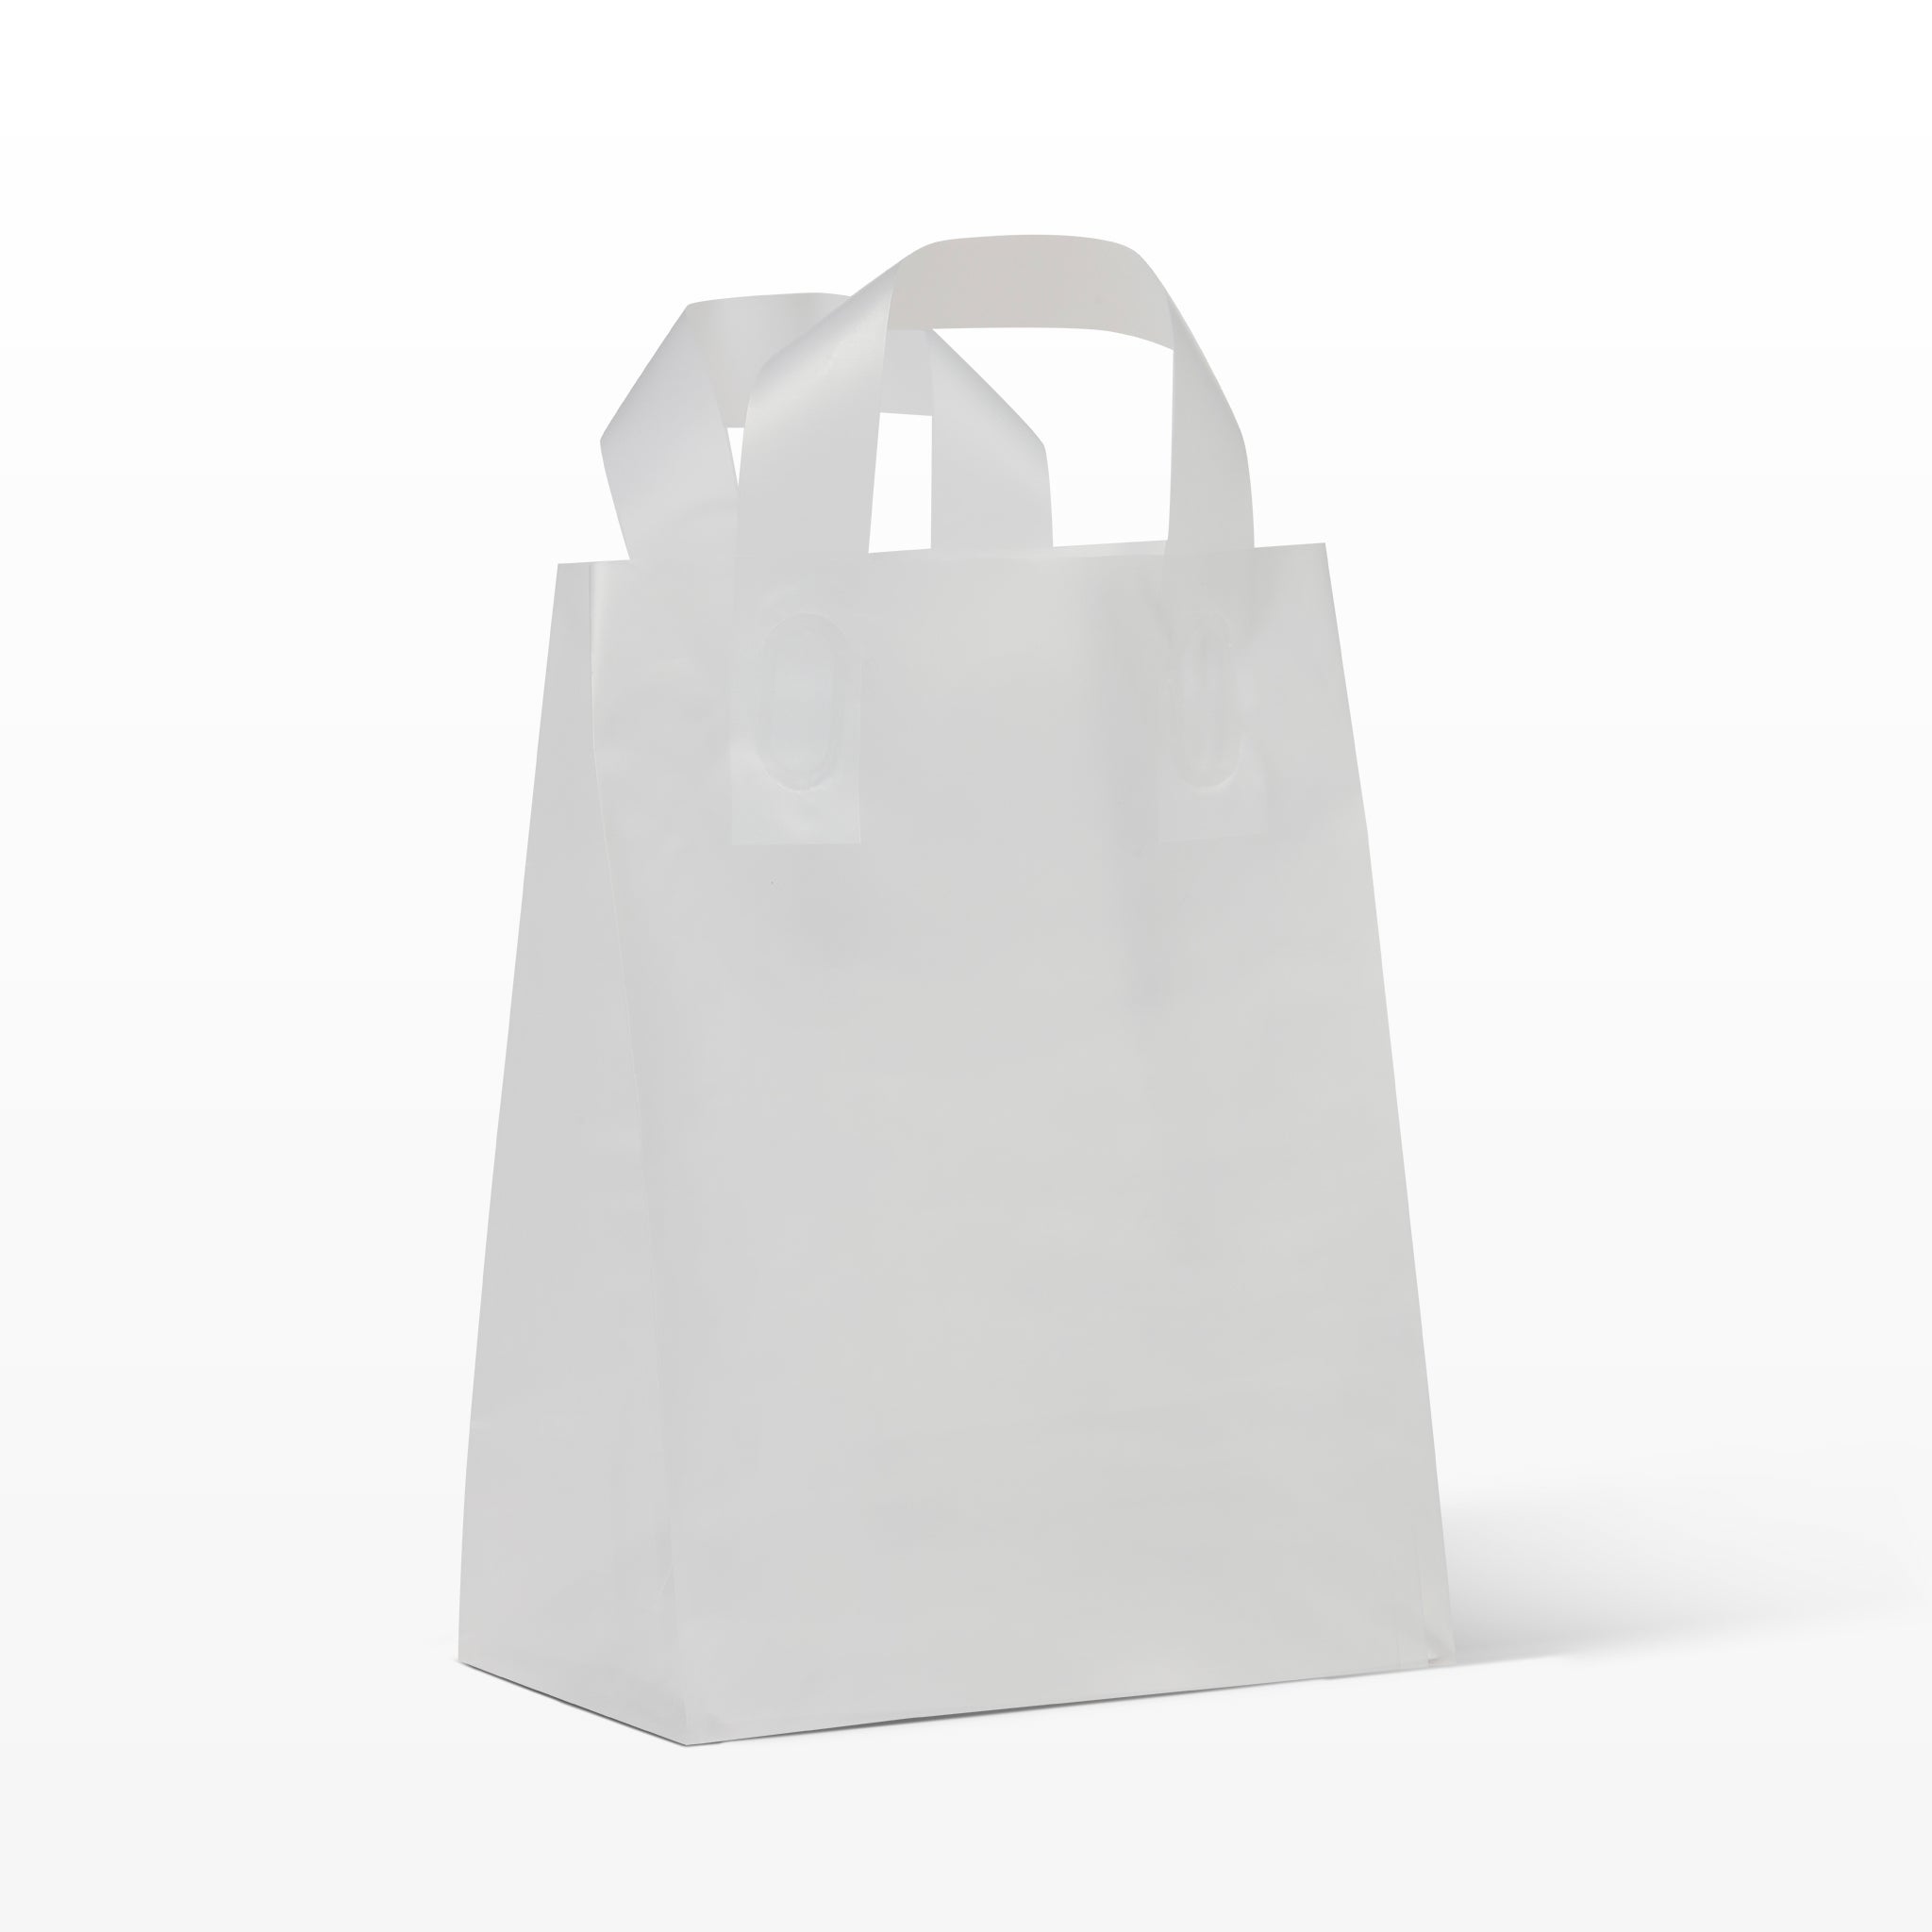 1/2 Peck Clear Plastic Tote Bags